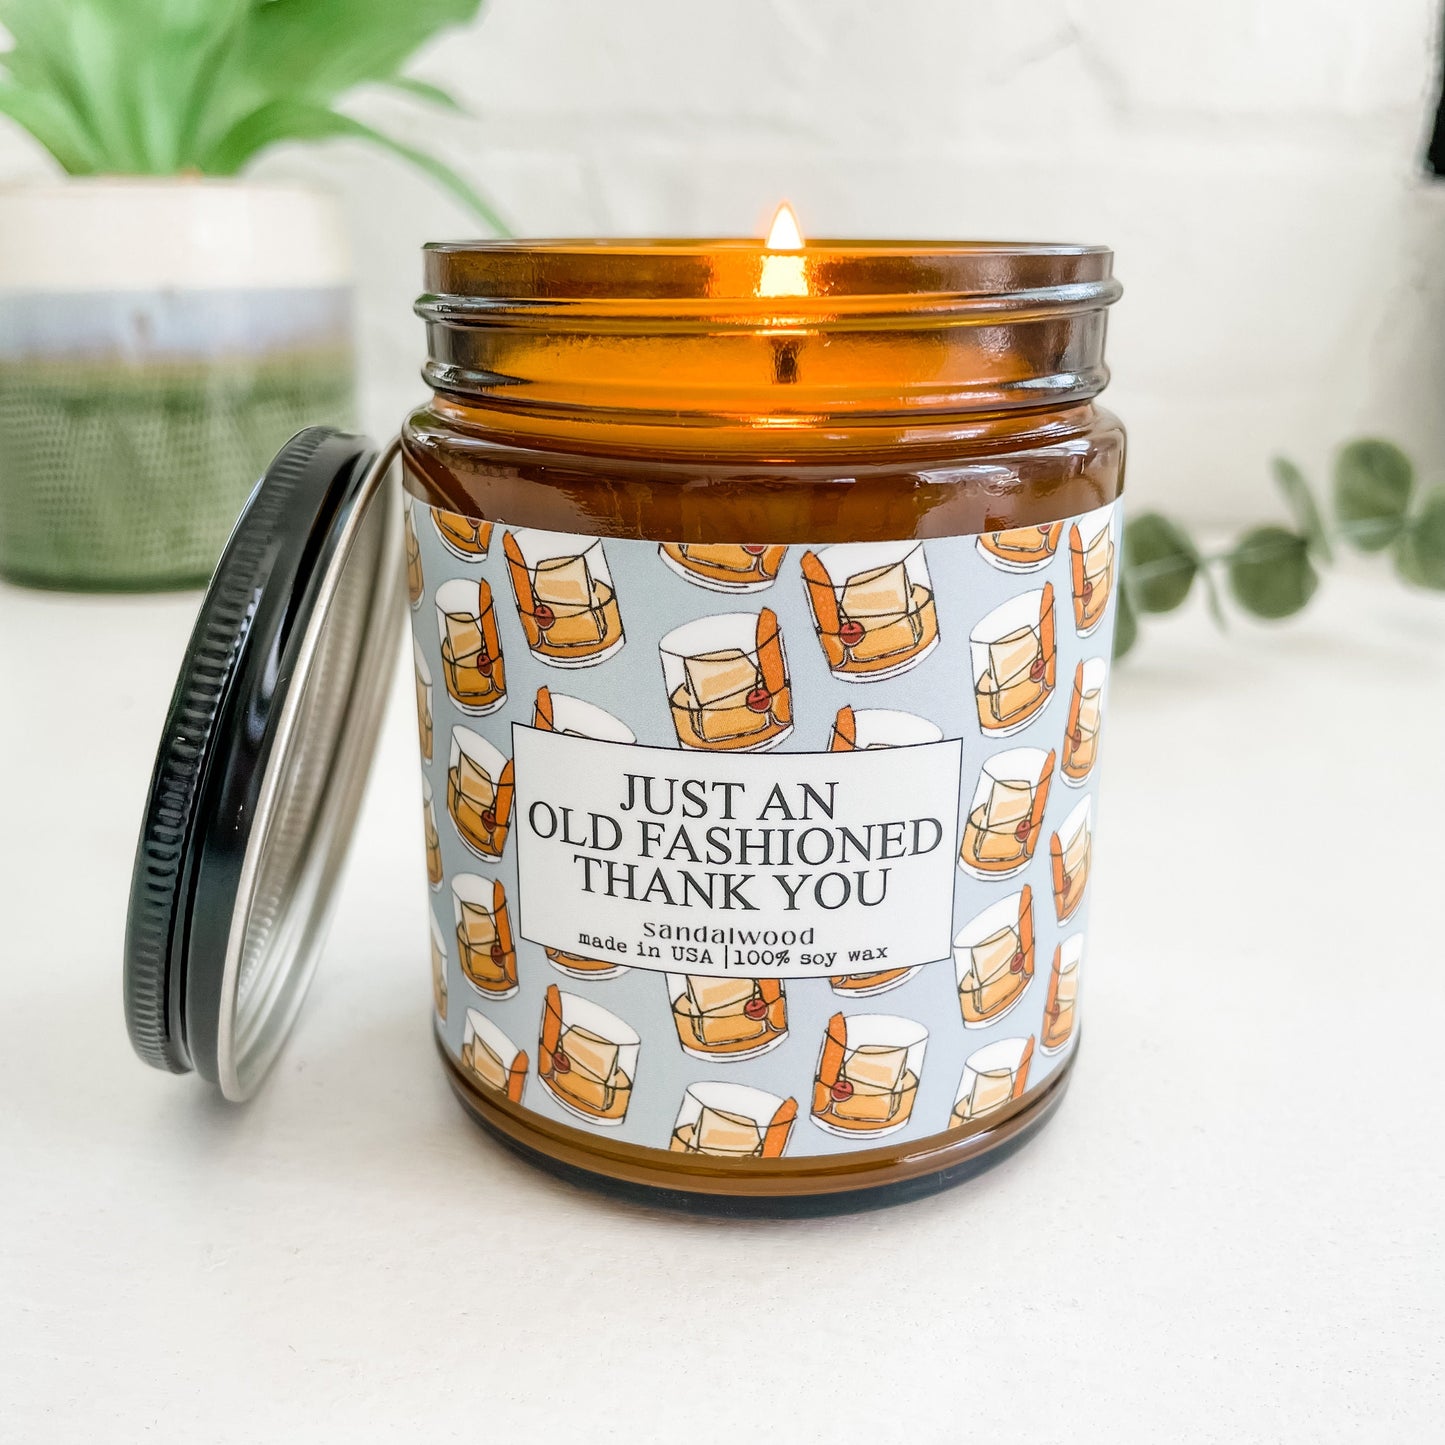 Just An Old Fashioned Thank You - 9oz Glass Jar Soy Candle - Sandalwood